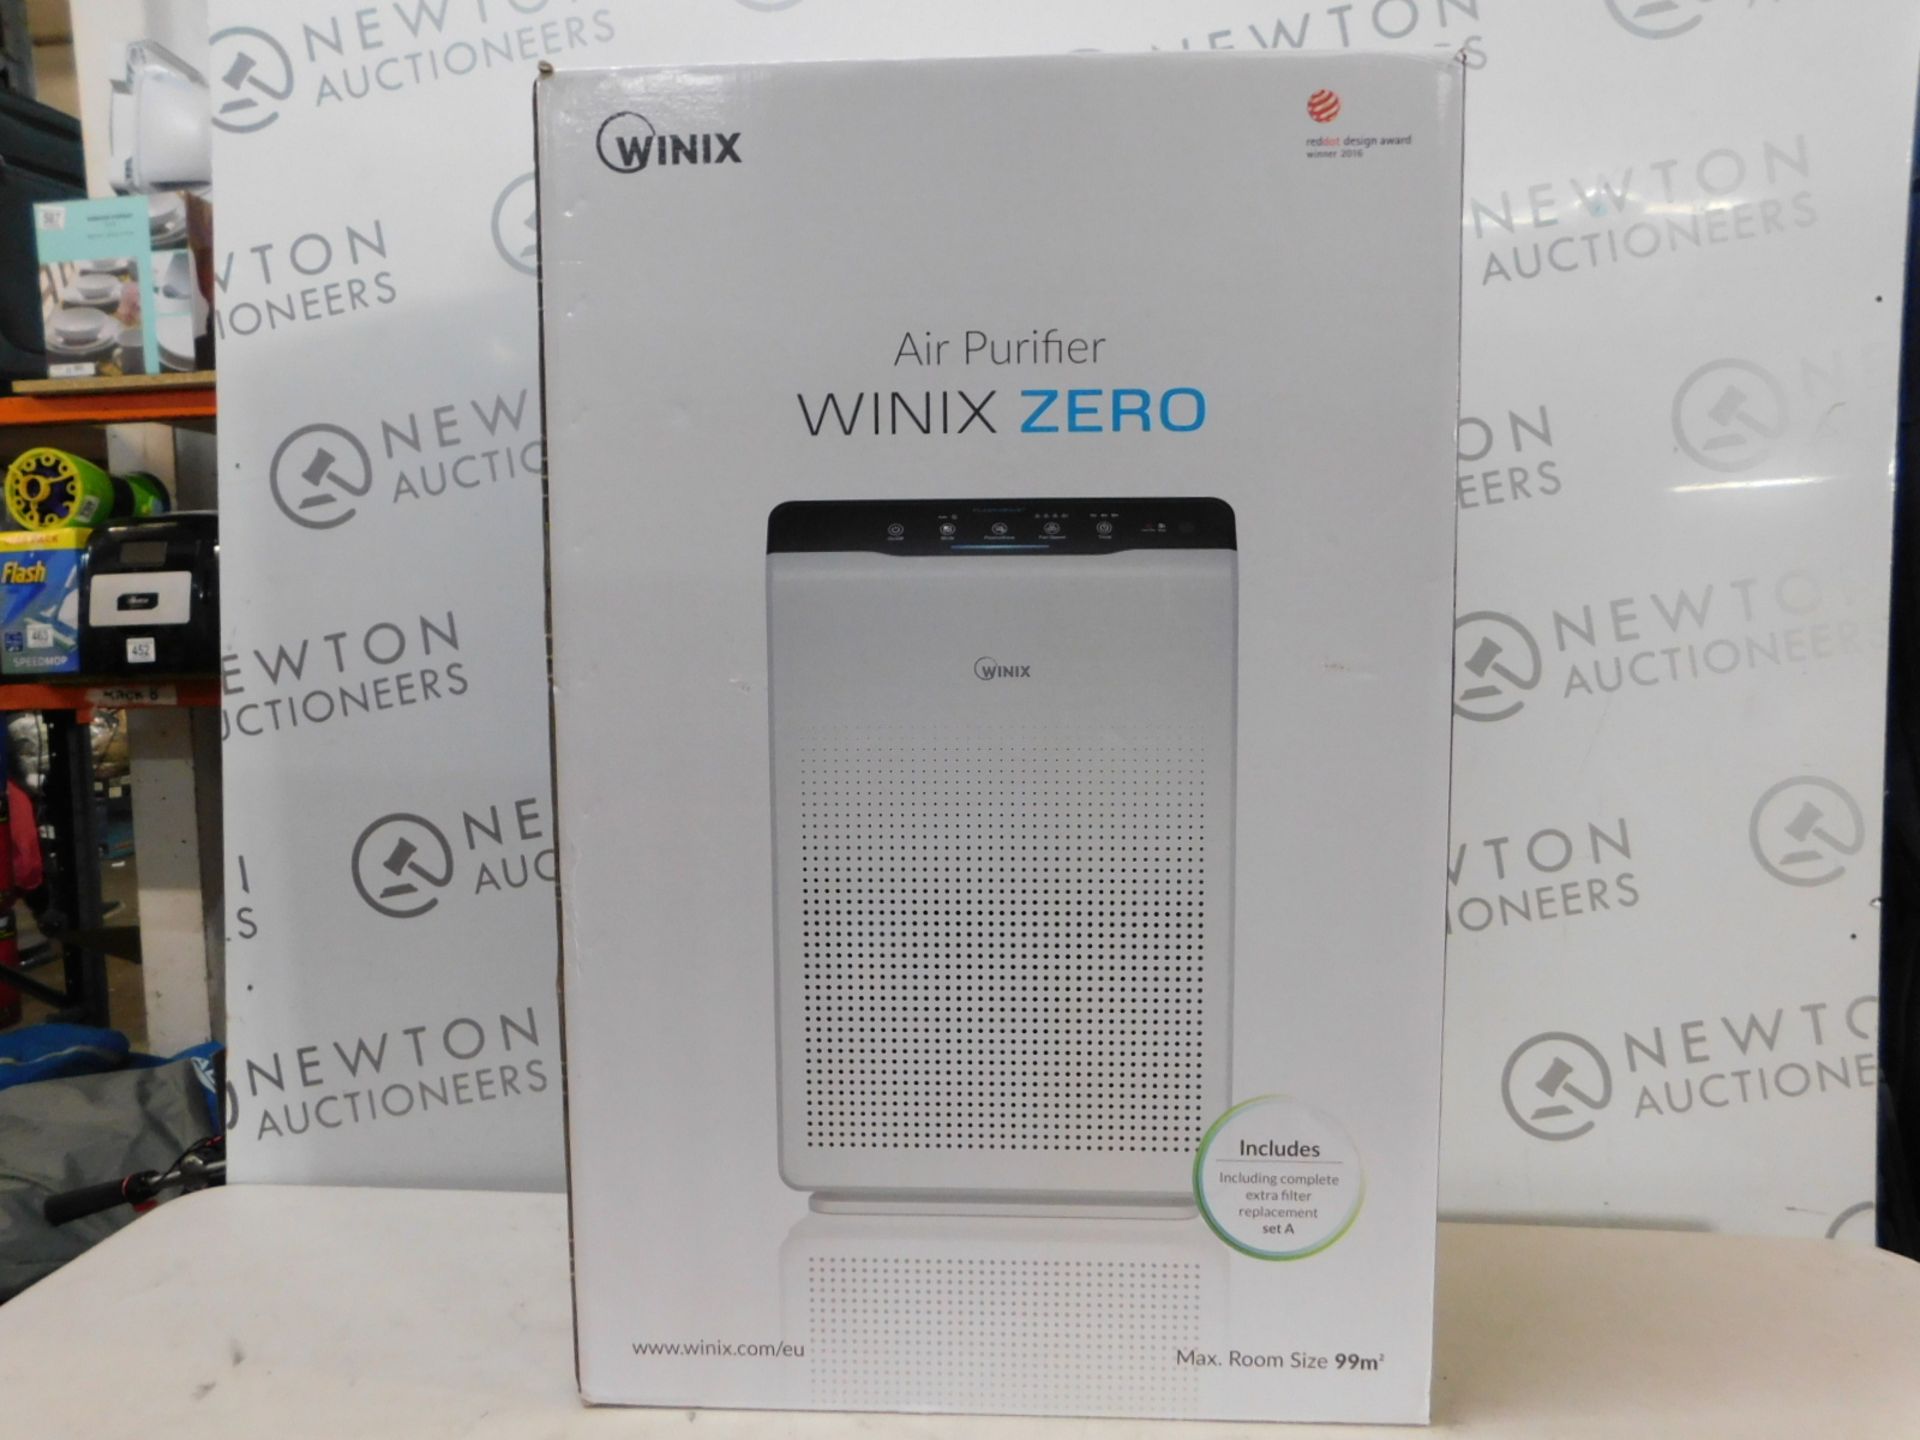 1 BOXED WINIX 2020EU TRUE HEPA AIR PURIFIER WITH 4-STAGE CLEANING RRP Â£299